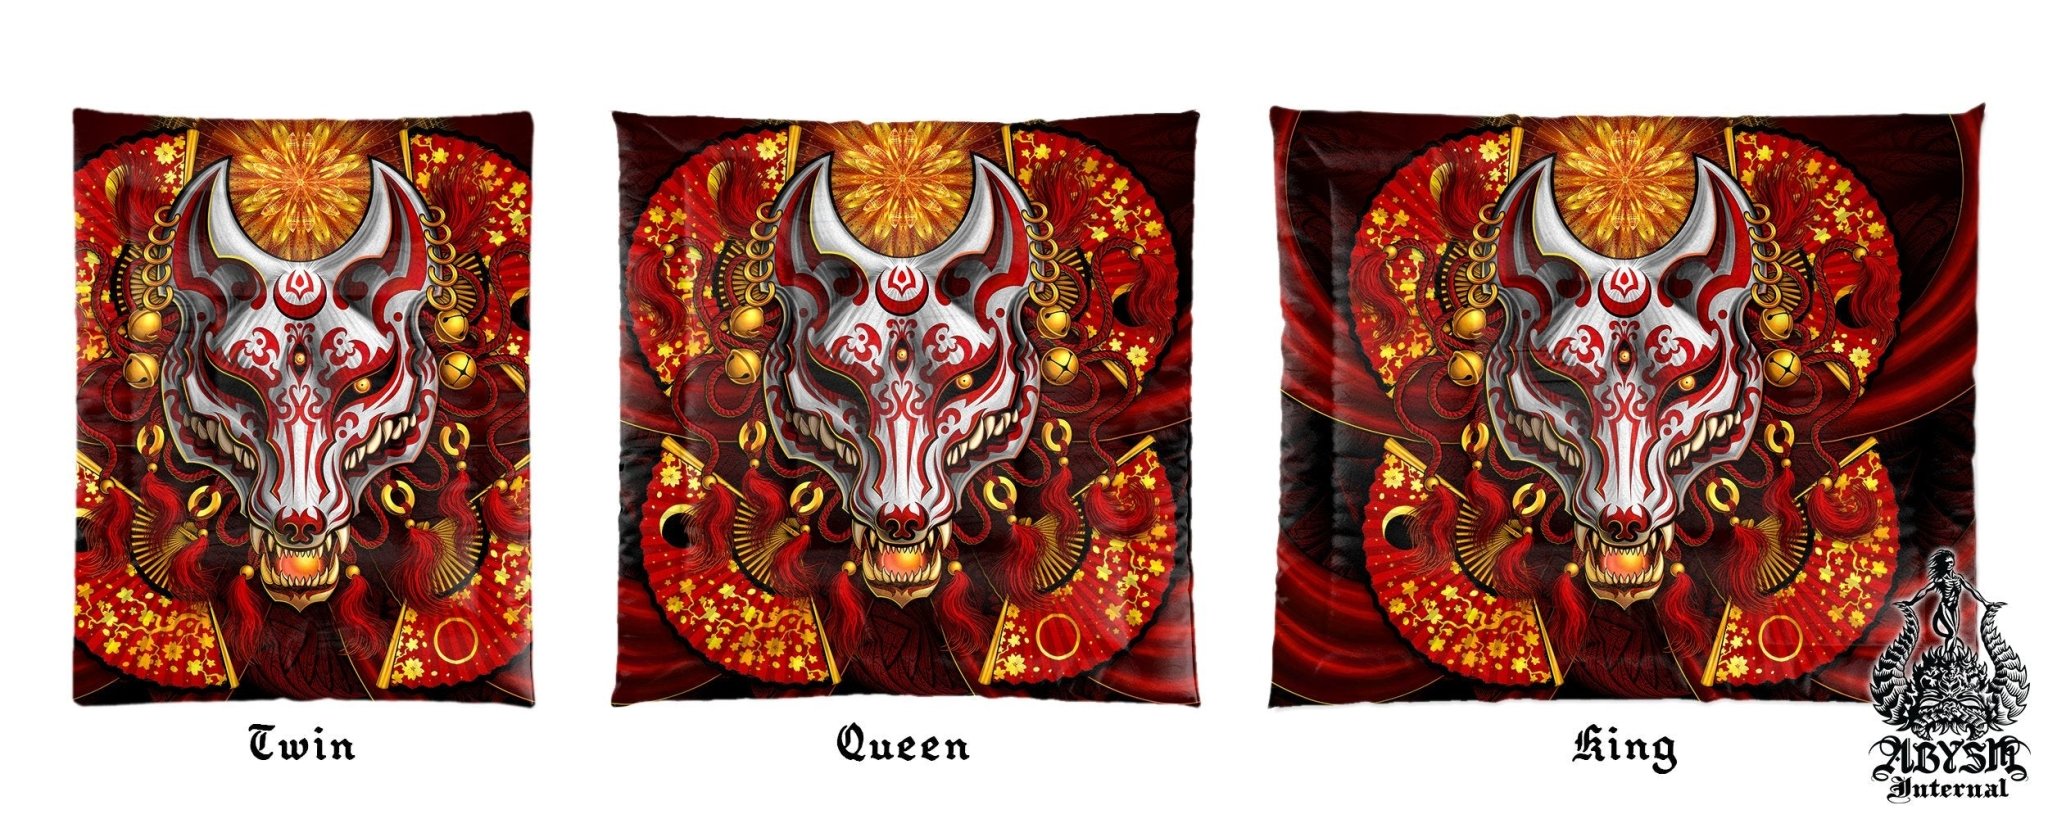 Kitsune Mask Bedding Set, Comforter and Duvet, Fox Okami and Anime Bed Cover and Bedroom Decor, King, Queen and Twin Size - Red and White - Abysm Internal